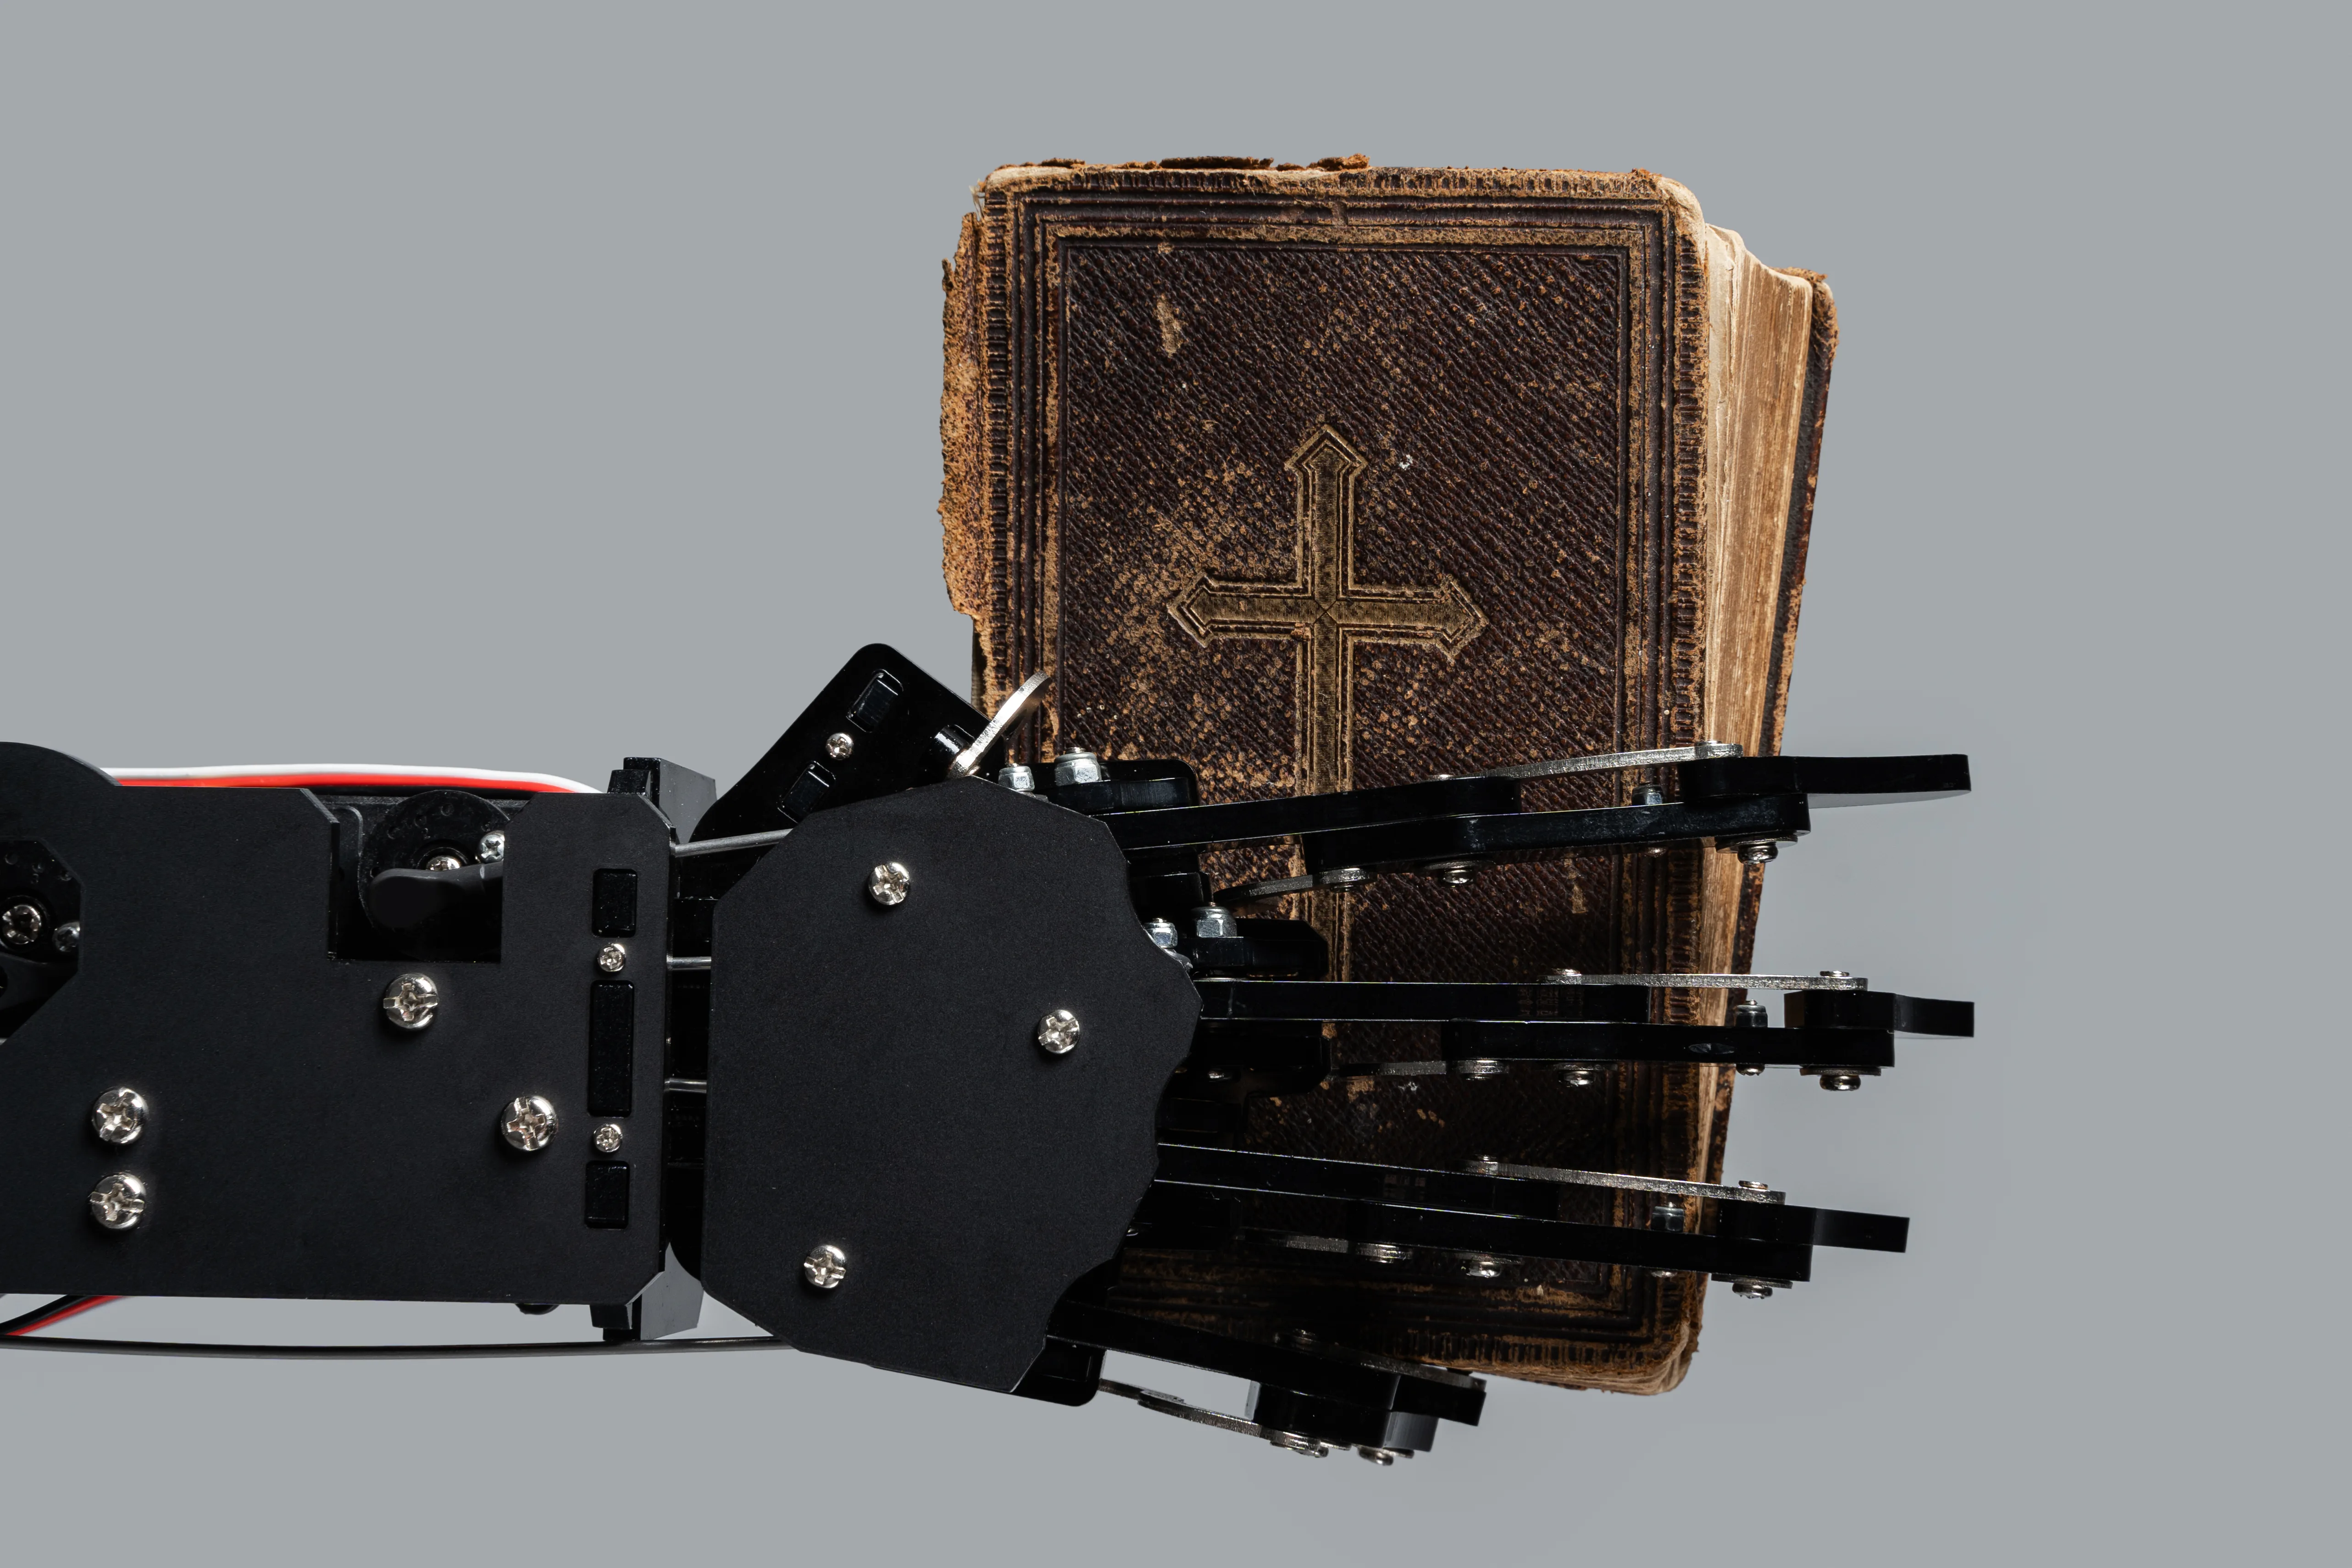 real-robots-hand-with-ancient-bible-concepts-of-artificial-int